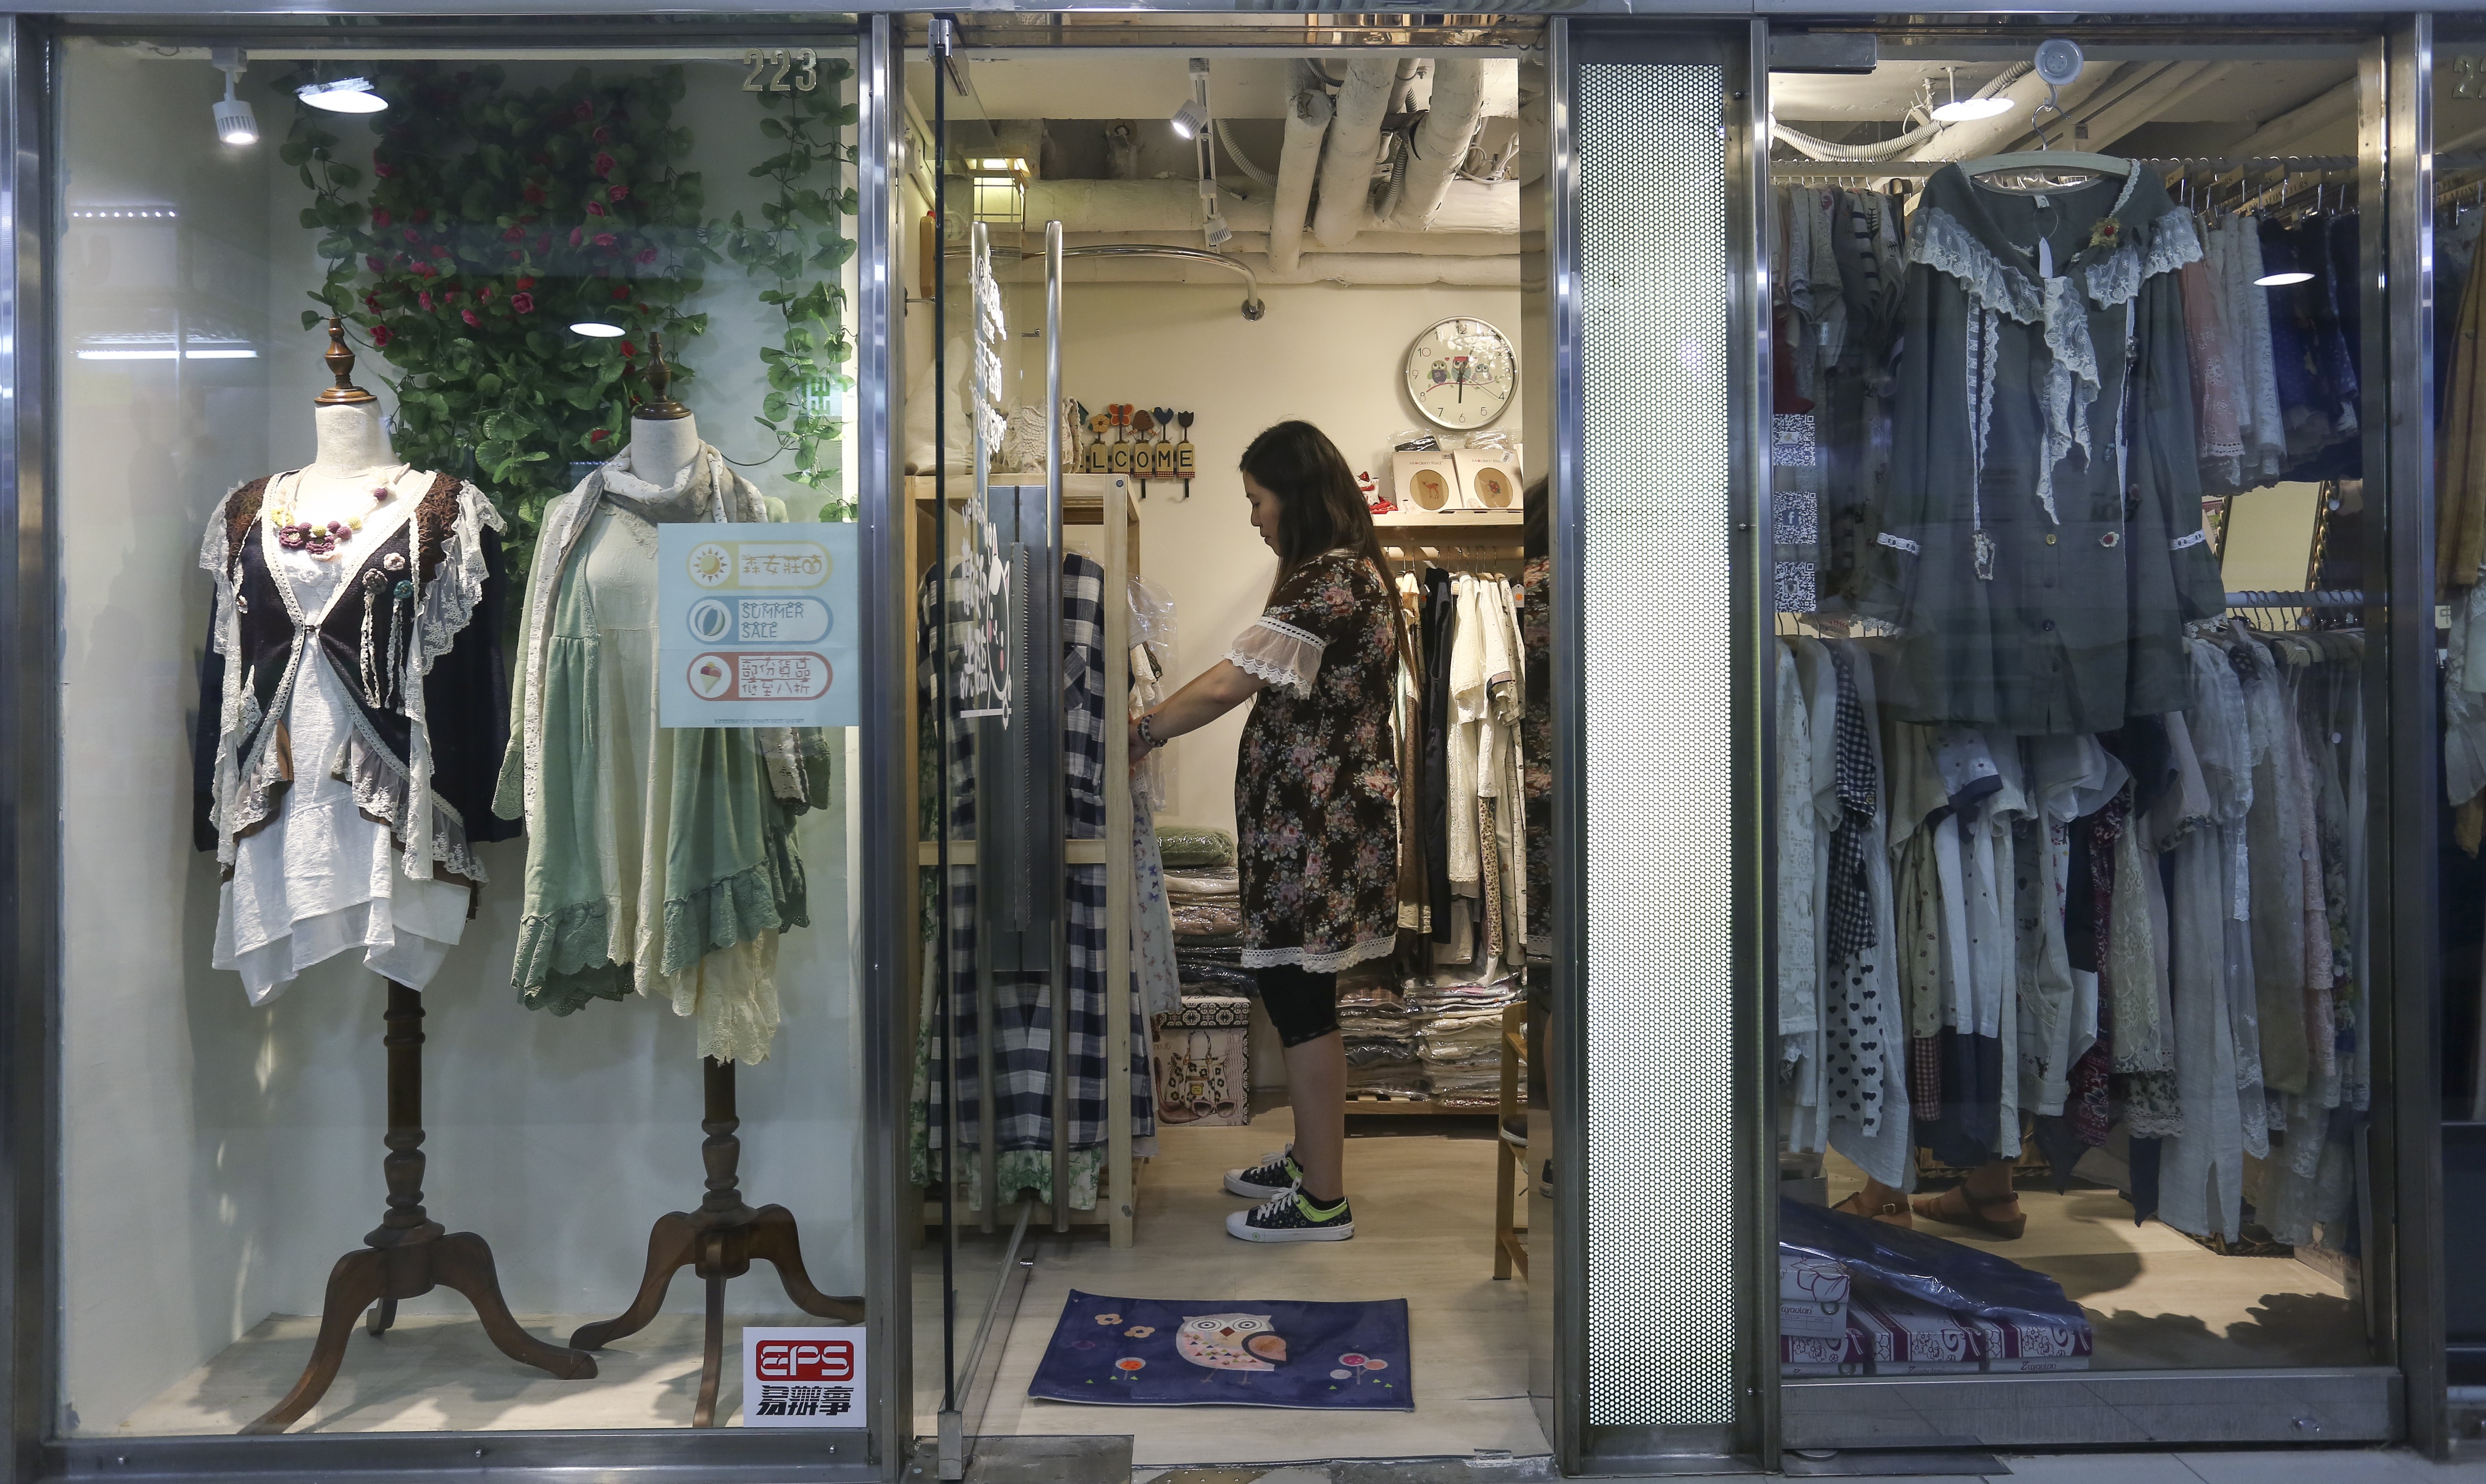 Small retailers in Hong Kong are the hardest hit, as online shopping gathers pace and rents remain high. Photo: Jonathan Wong